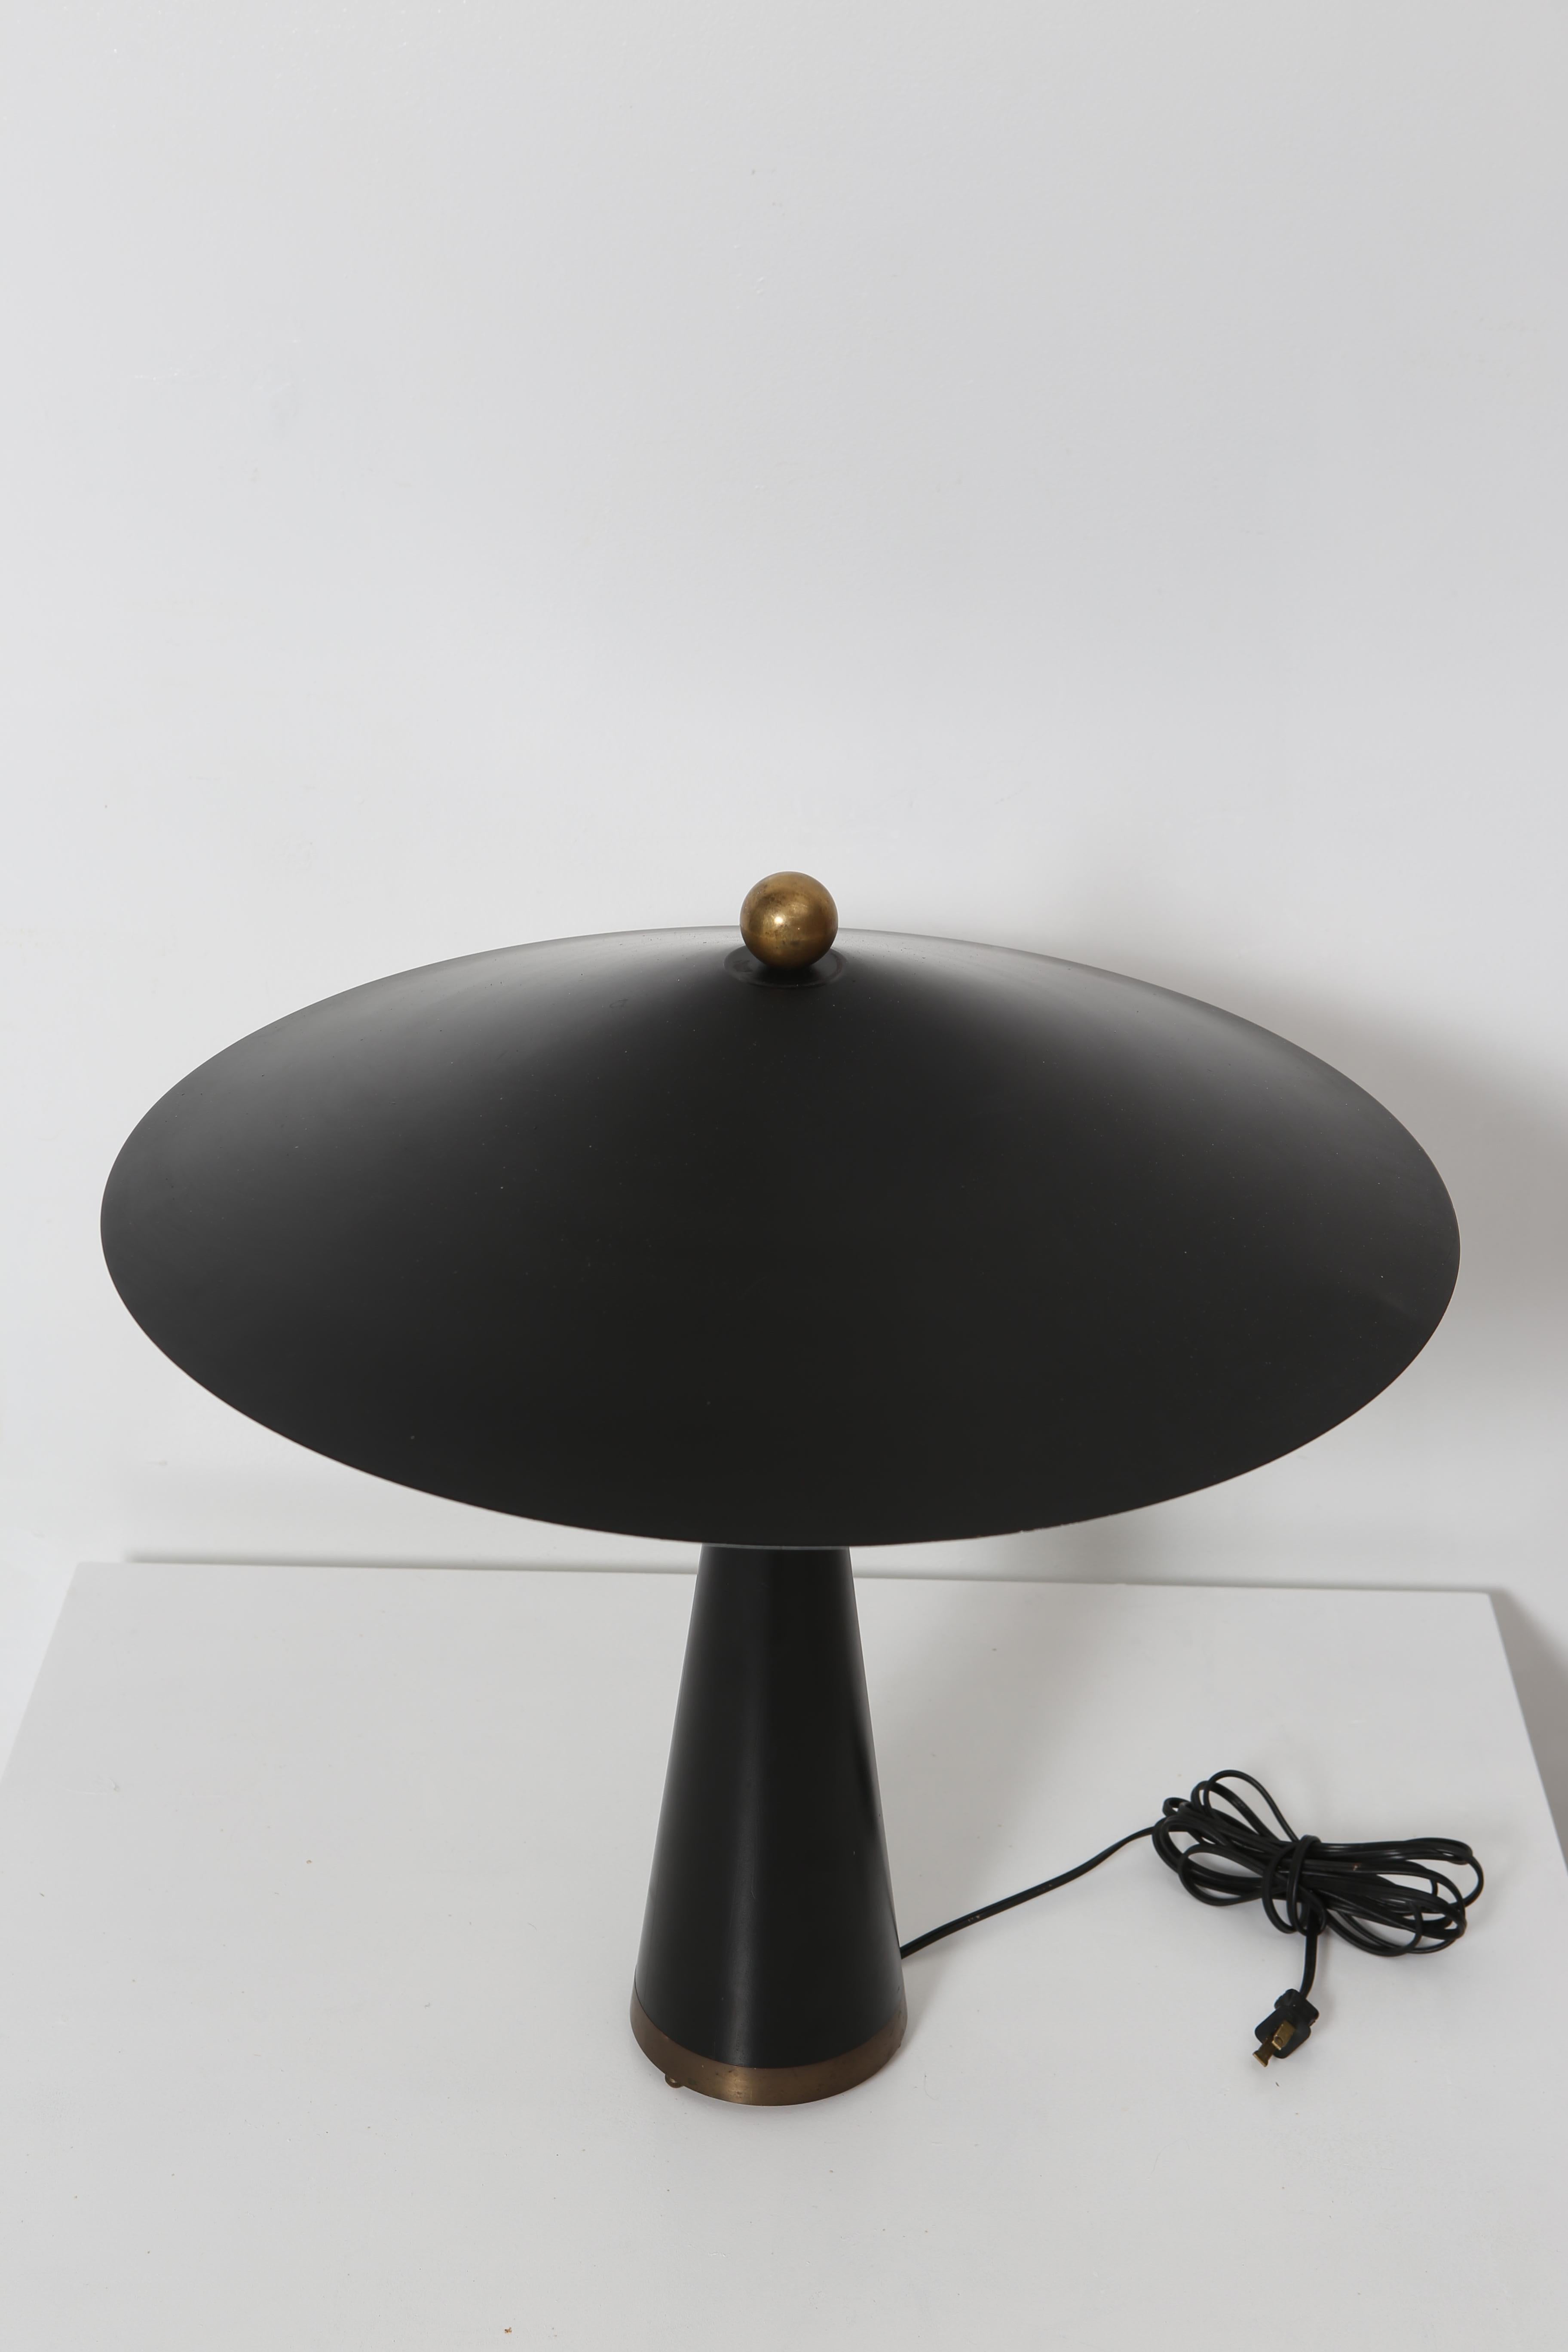 American Post-Modern Leather and Brass Studio-Made Lamp